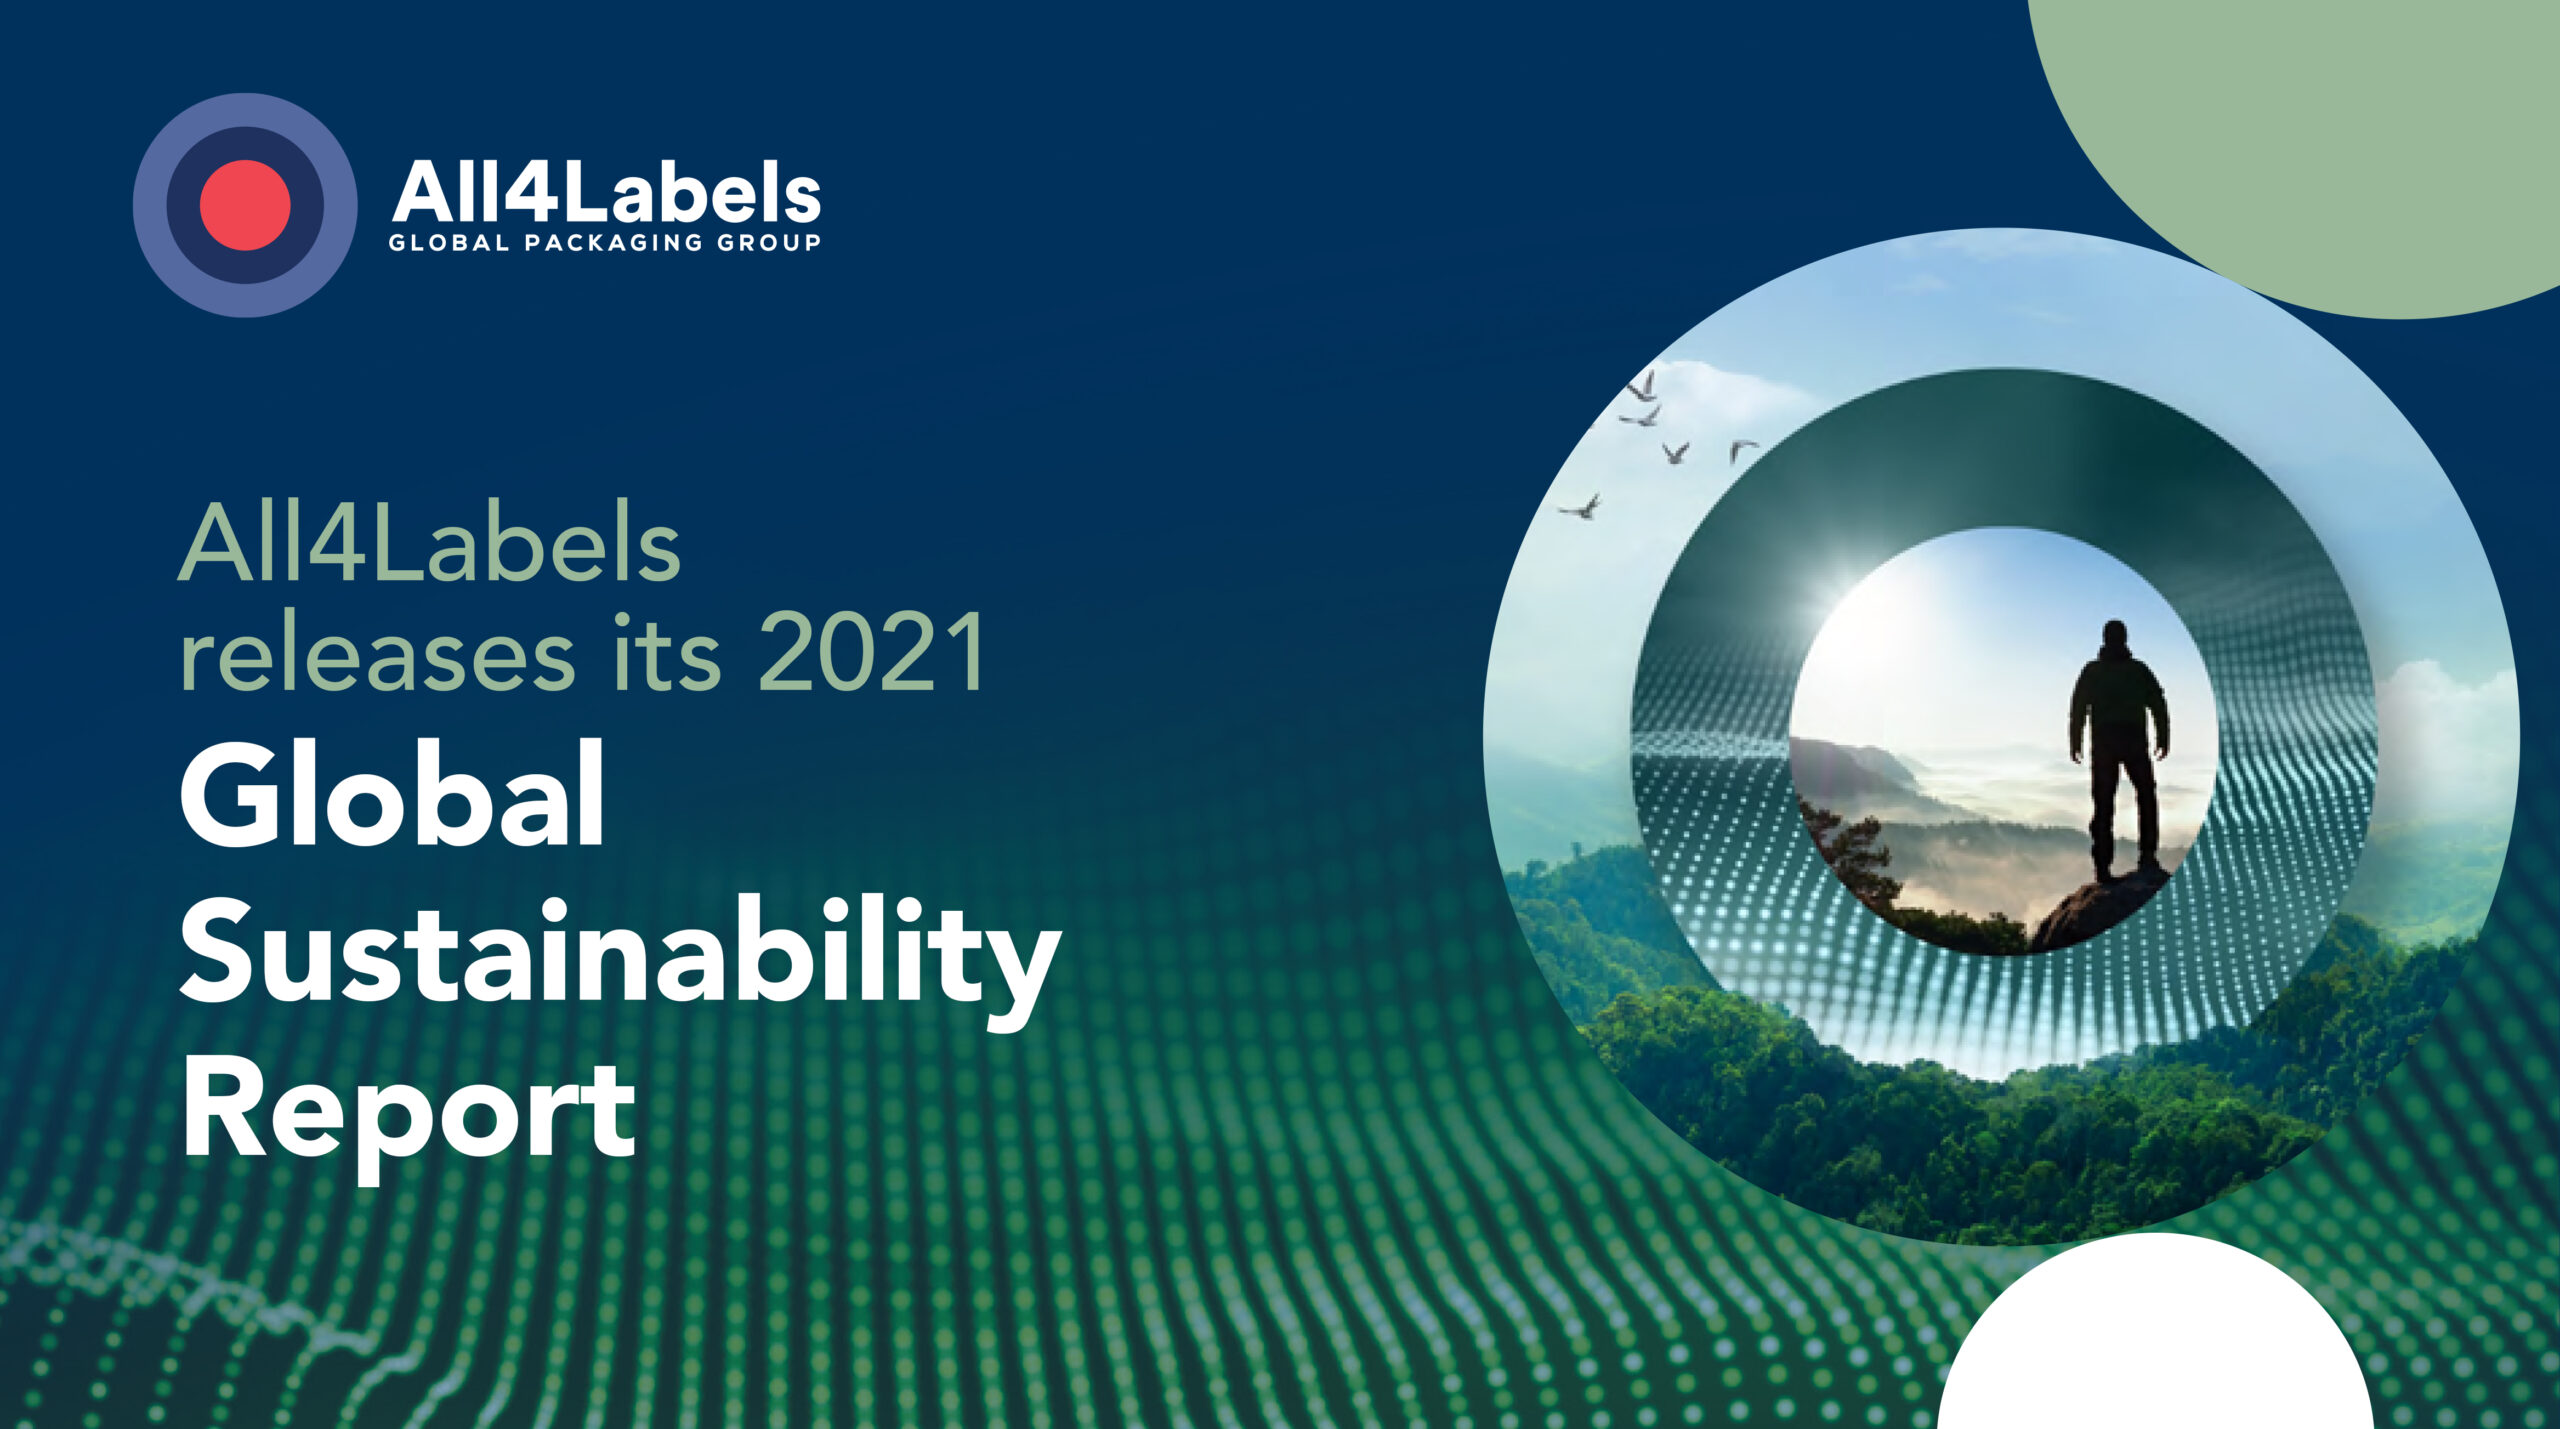 All4Labels publishes the first global sustainability report to communicate its eco-contribution across the packaging industry